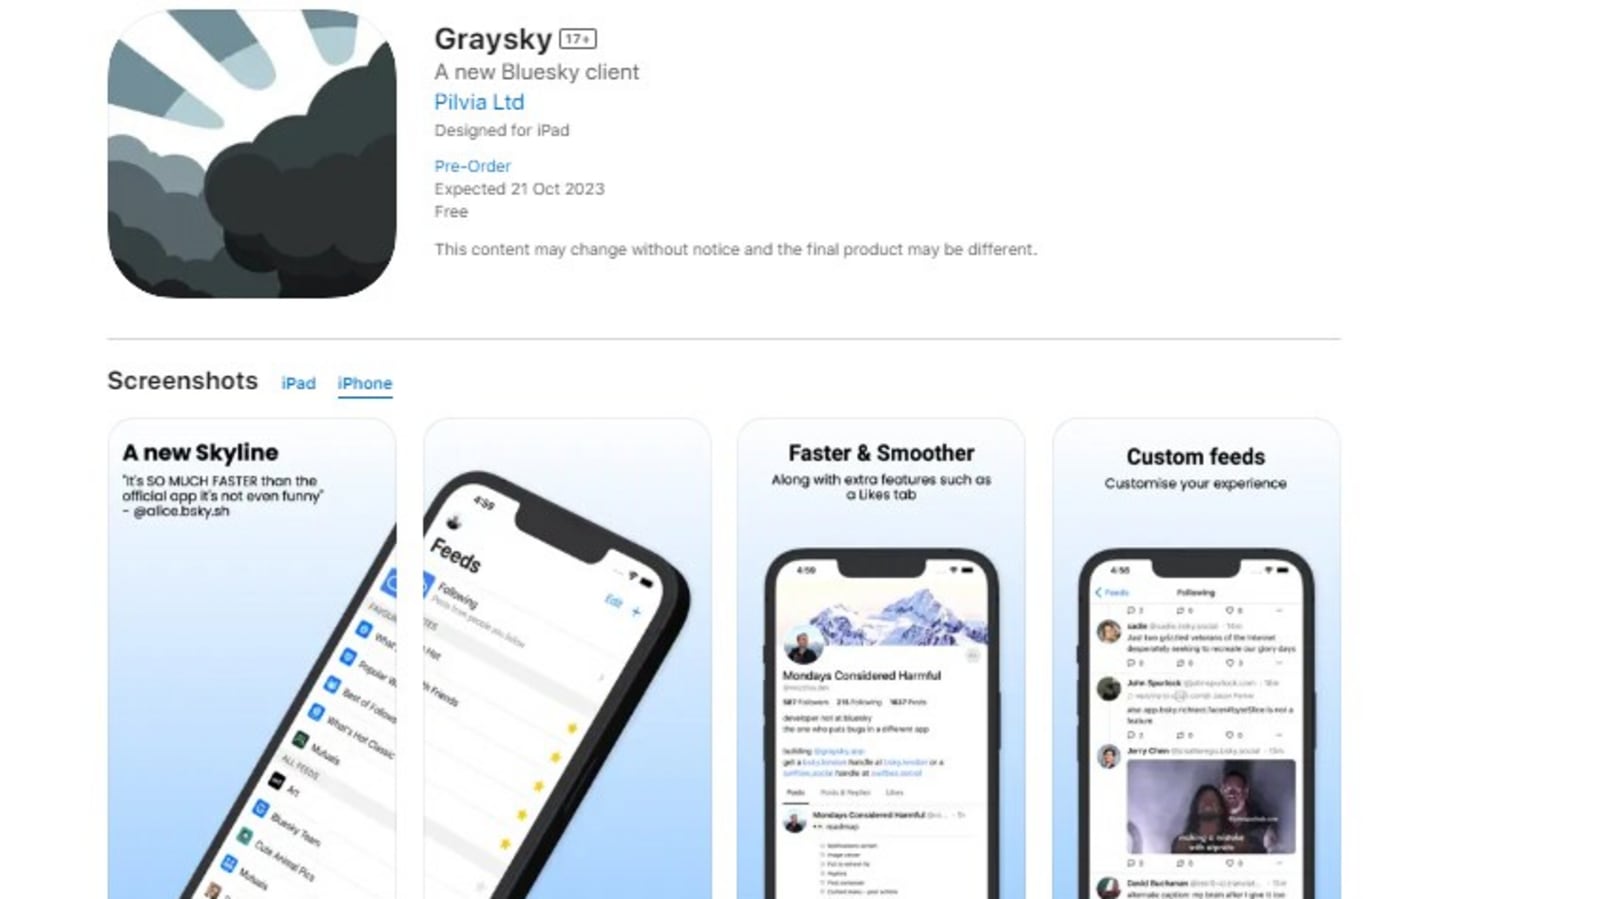 Bluesky gets its 1st third-party app! Graysky to launch soon on iOS and Android with new features